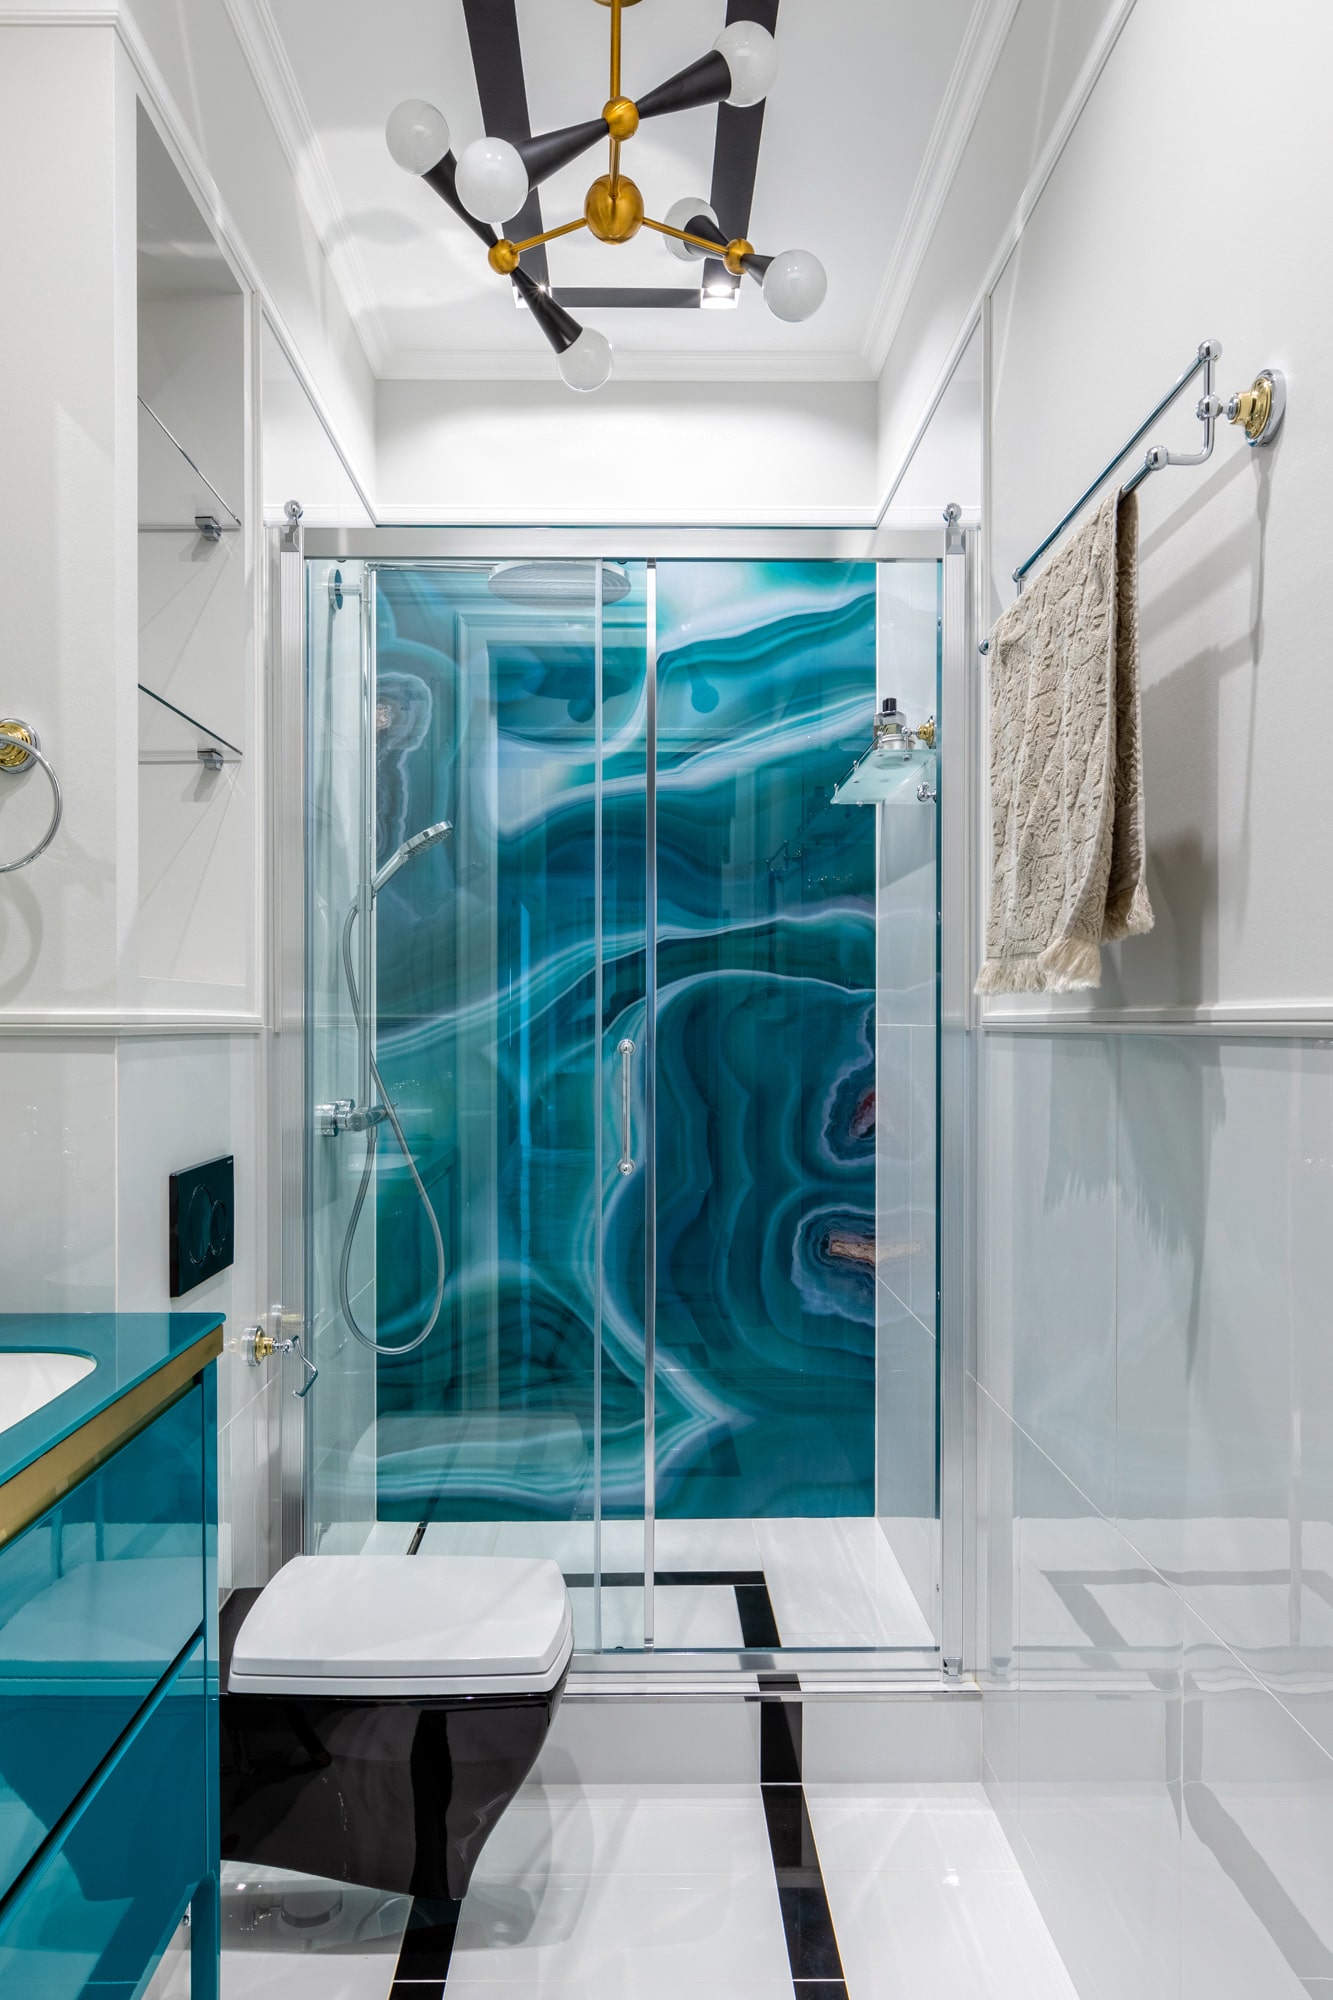 Interior shot of a bathroom with blue marble wall in the shower